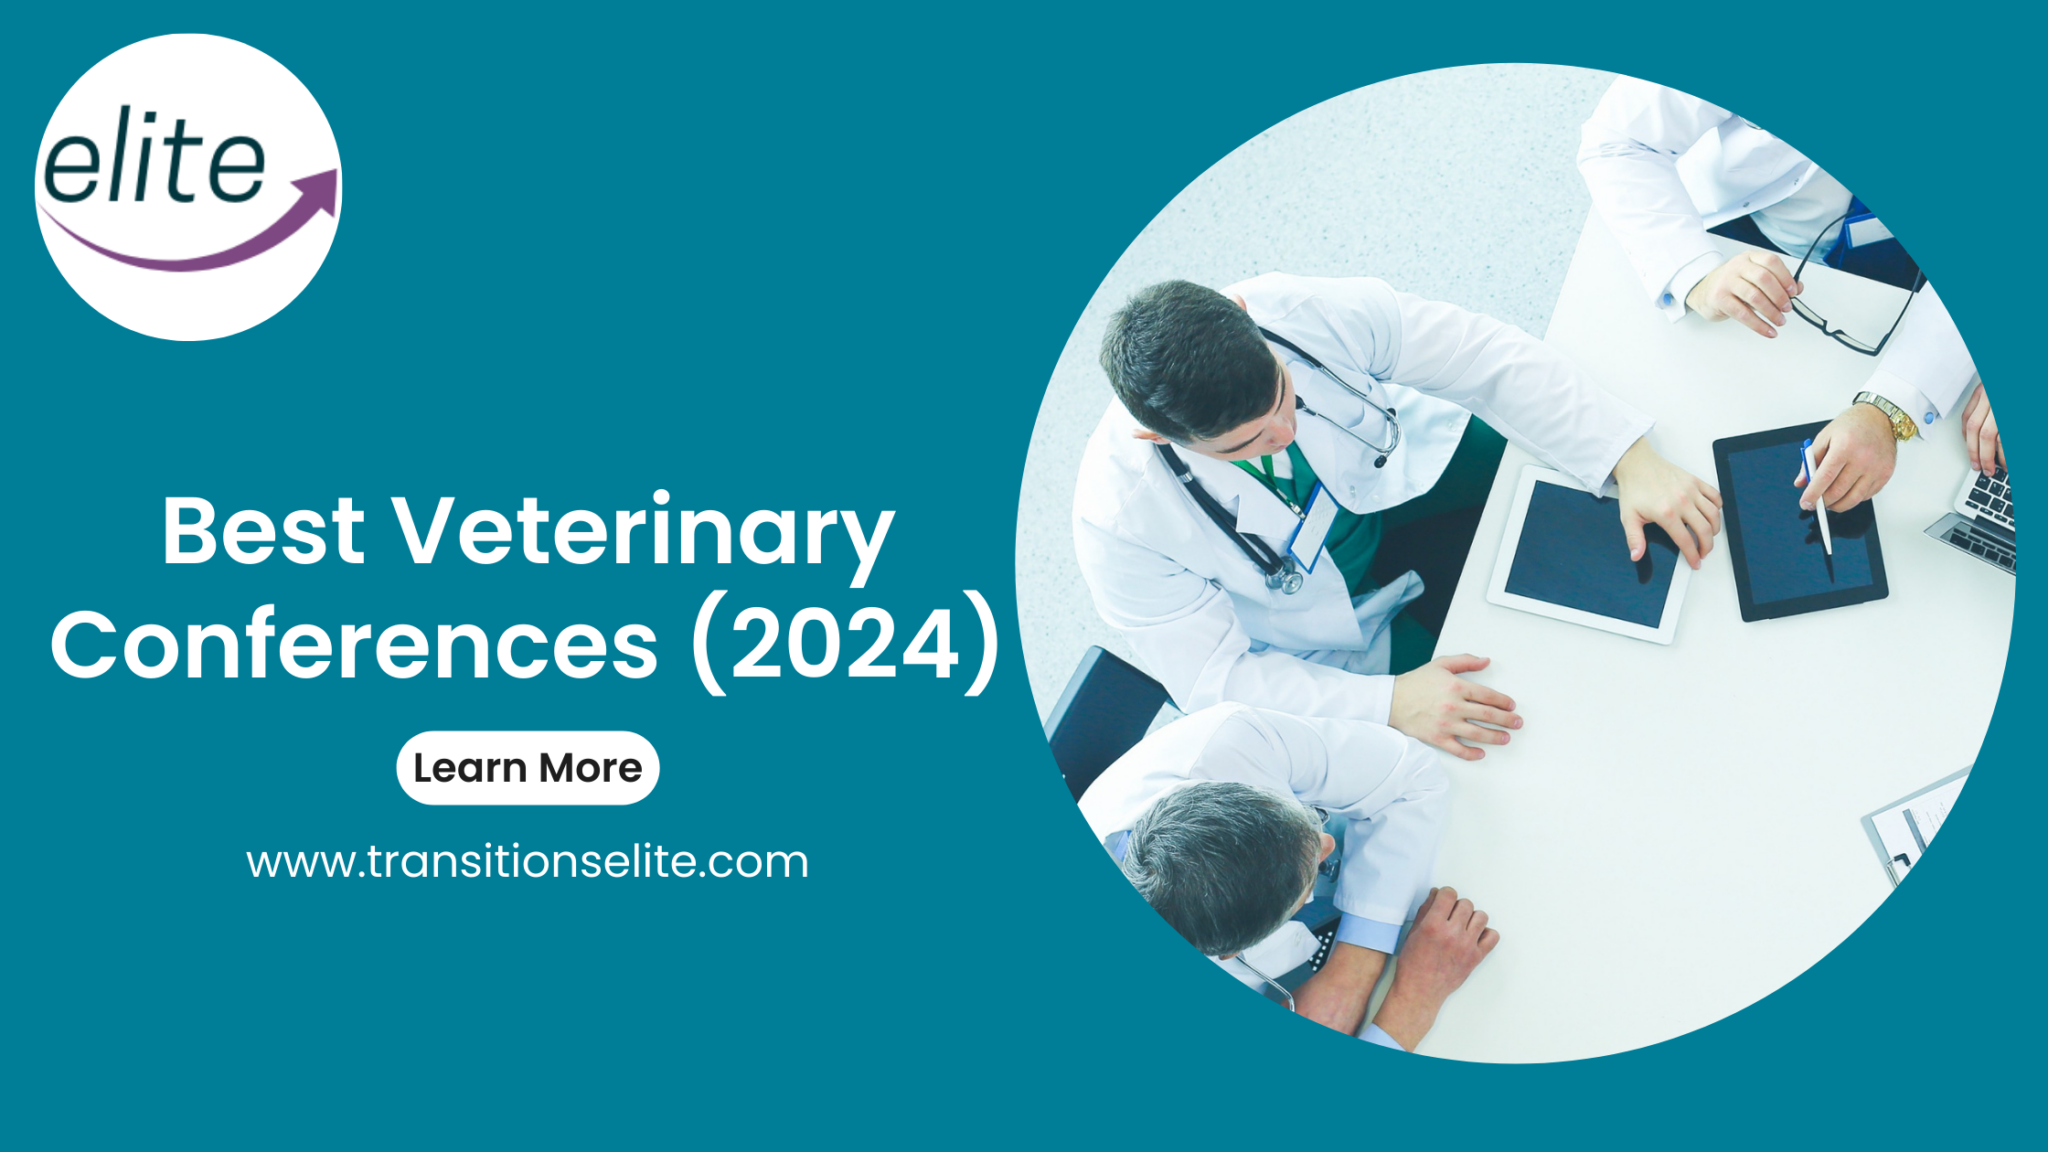 Best Veterinary Conferences 2024 2048x1152 